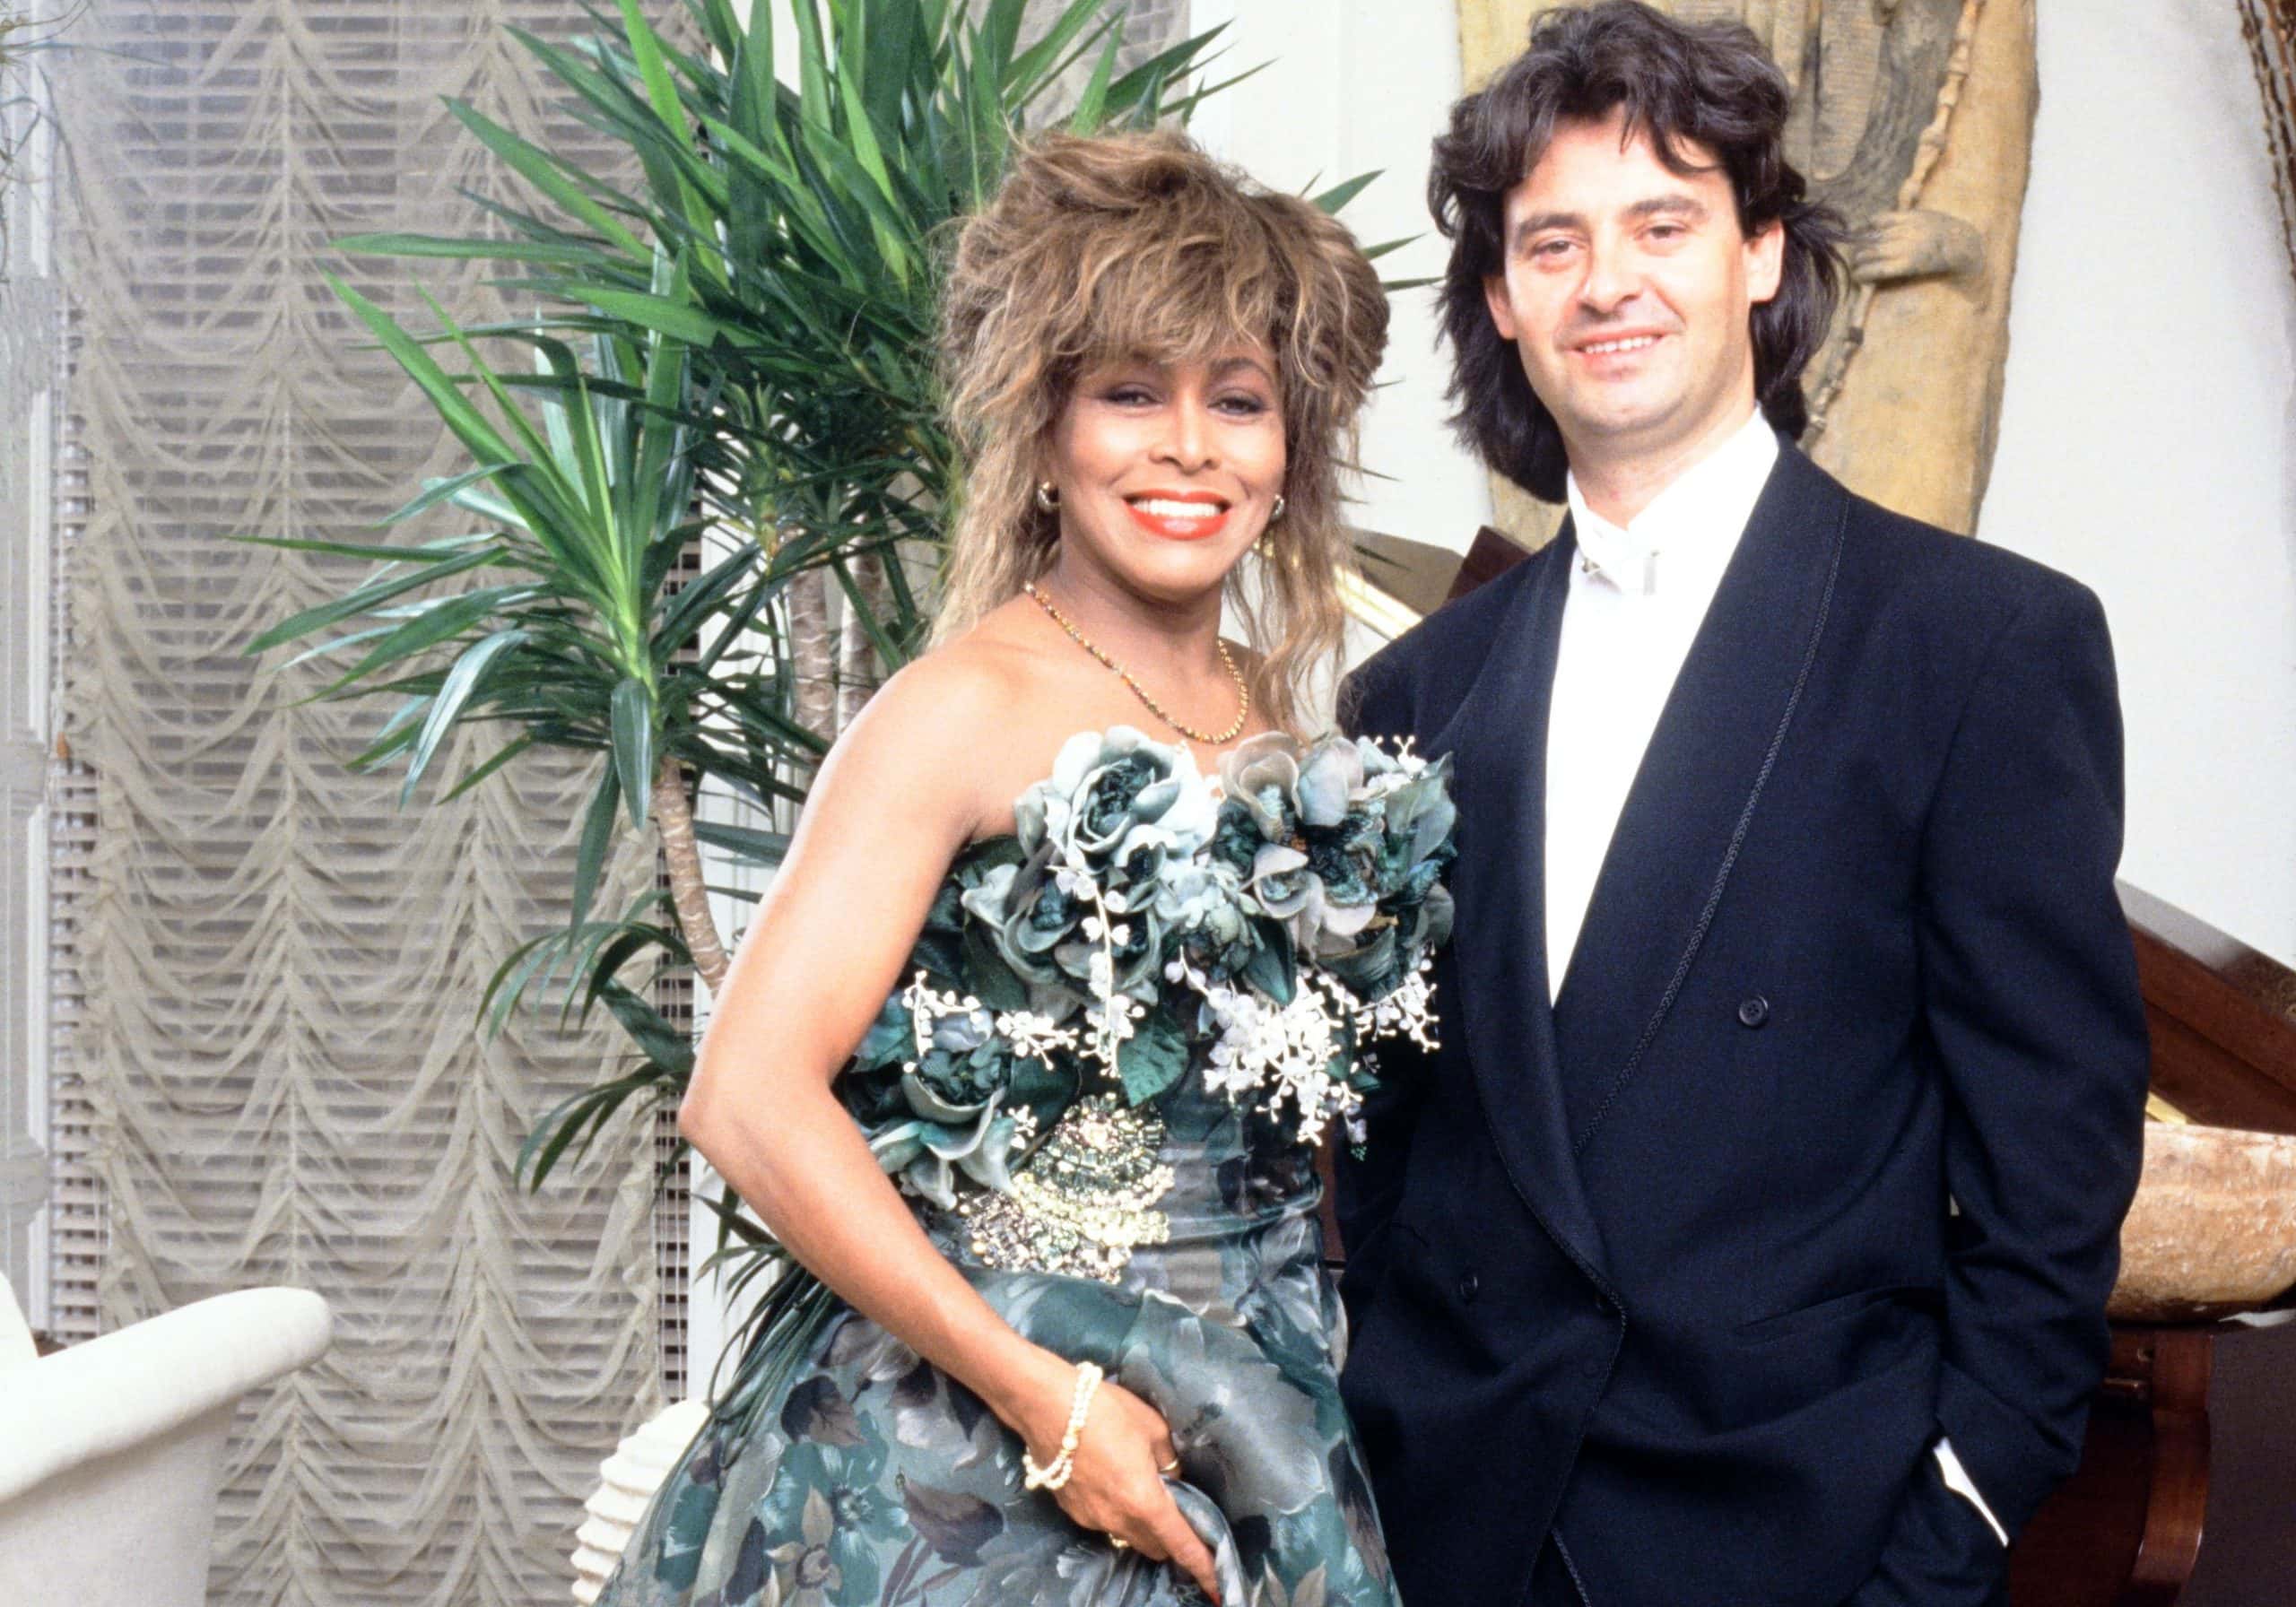 <p>In 1986, Tina arrived at Heathrow Airport in London. A German music exec by the name of Erwin Bach was there to greet her. The two hit it off, and it was finally time for Tina to enter another meaningful romantic relationship. Bach and Tina were together for more than three decades, and they married in 2013. <strong>But that's when disaster first struck.</strong></p>